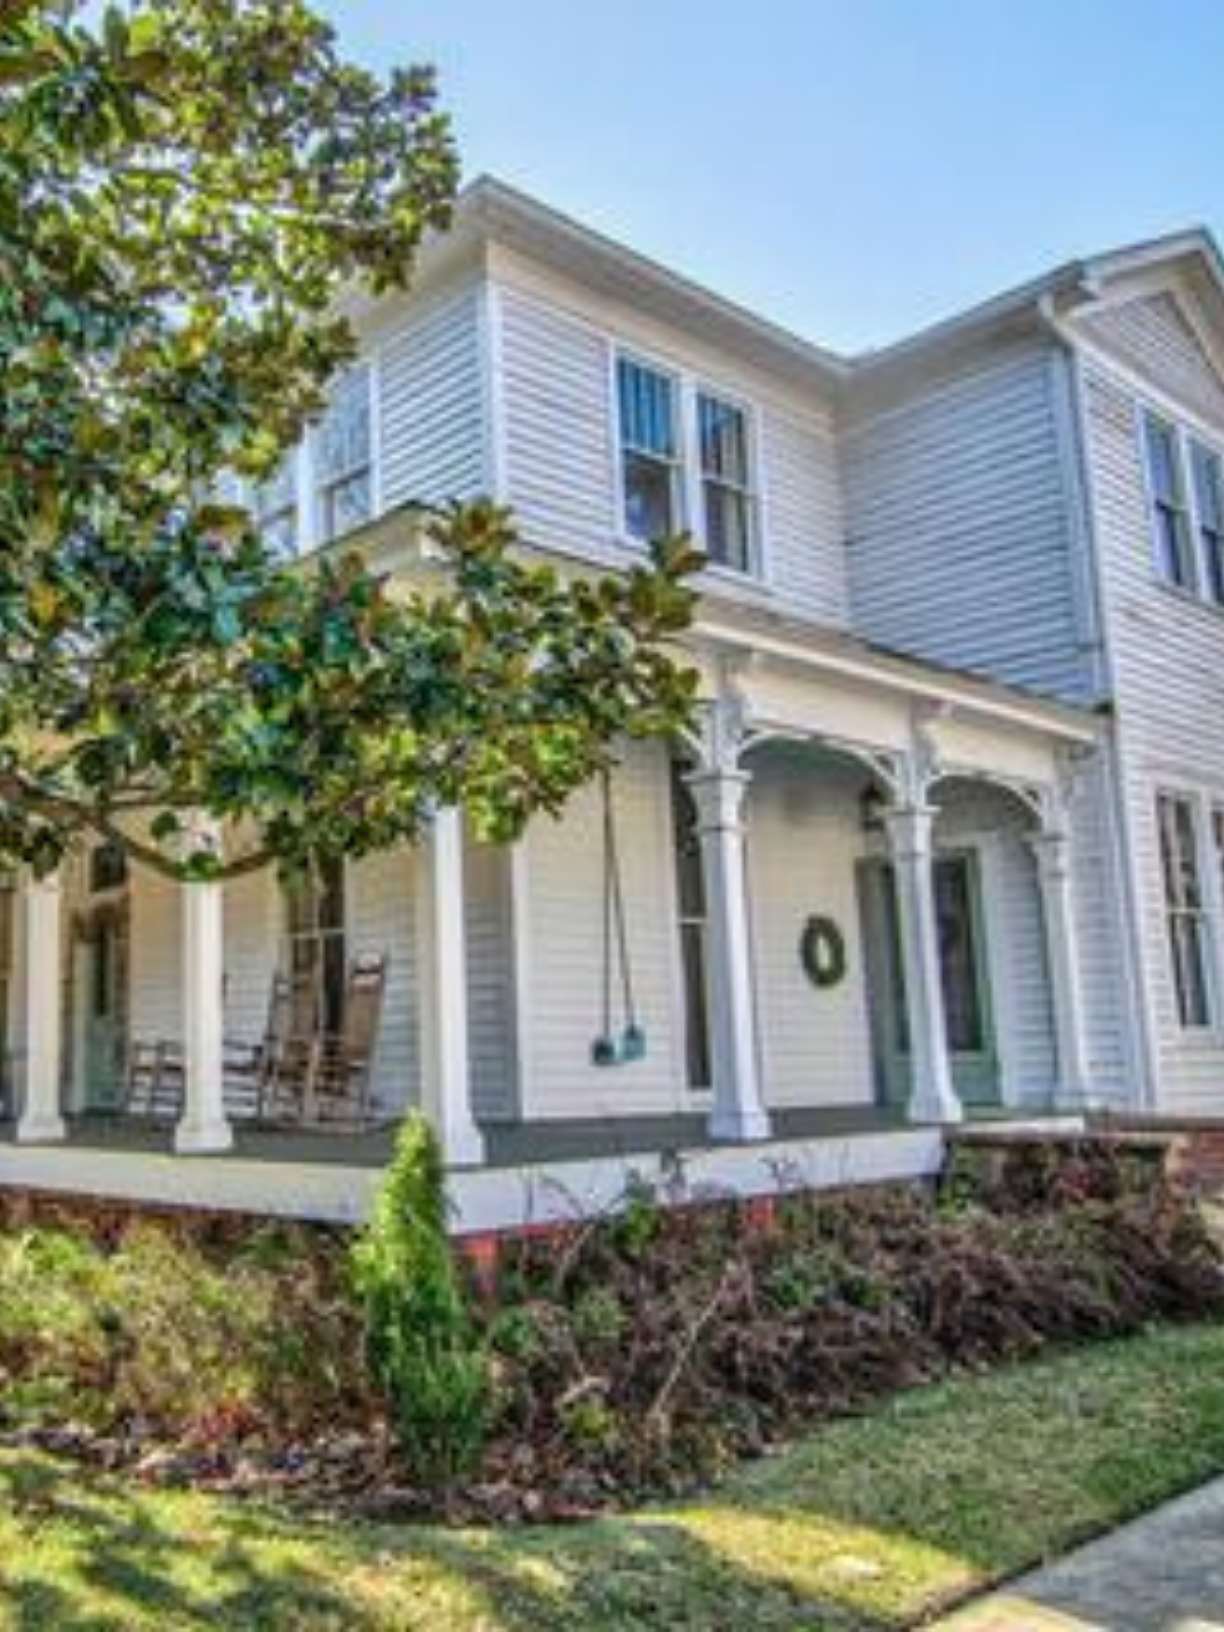 Move to Mississippi! Own an Historic 5 Bedroom Home for $325,000